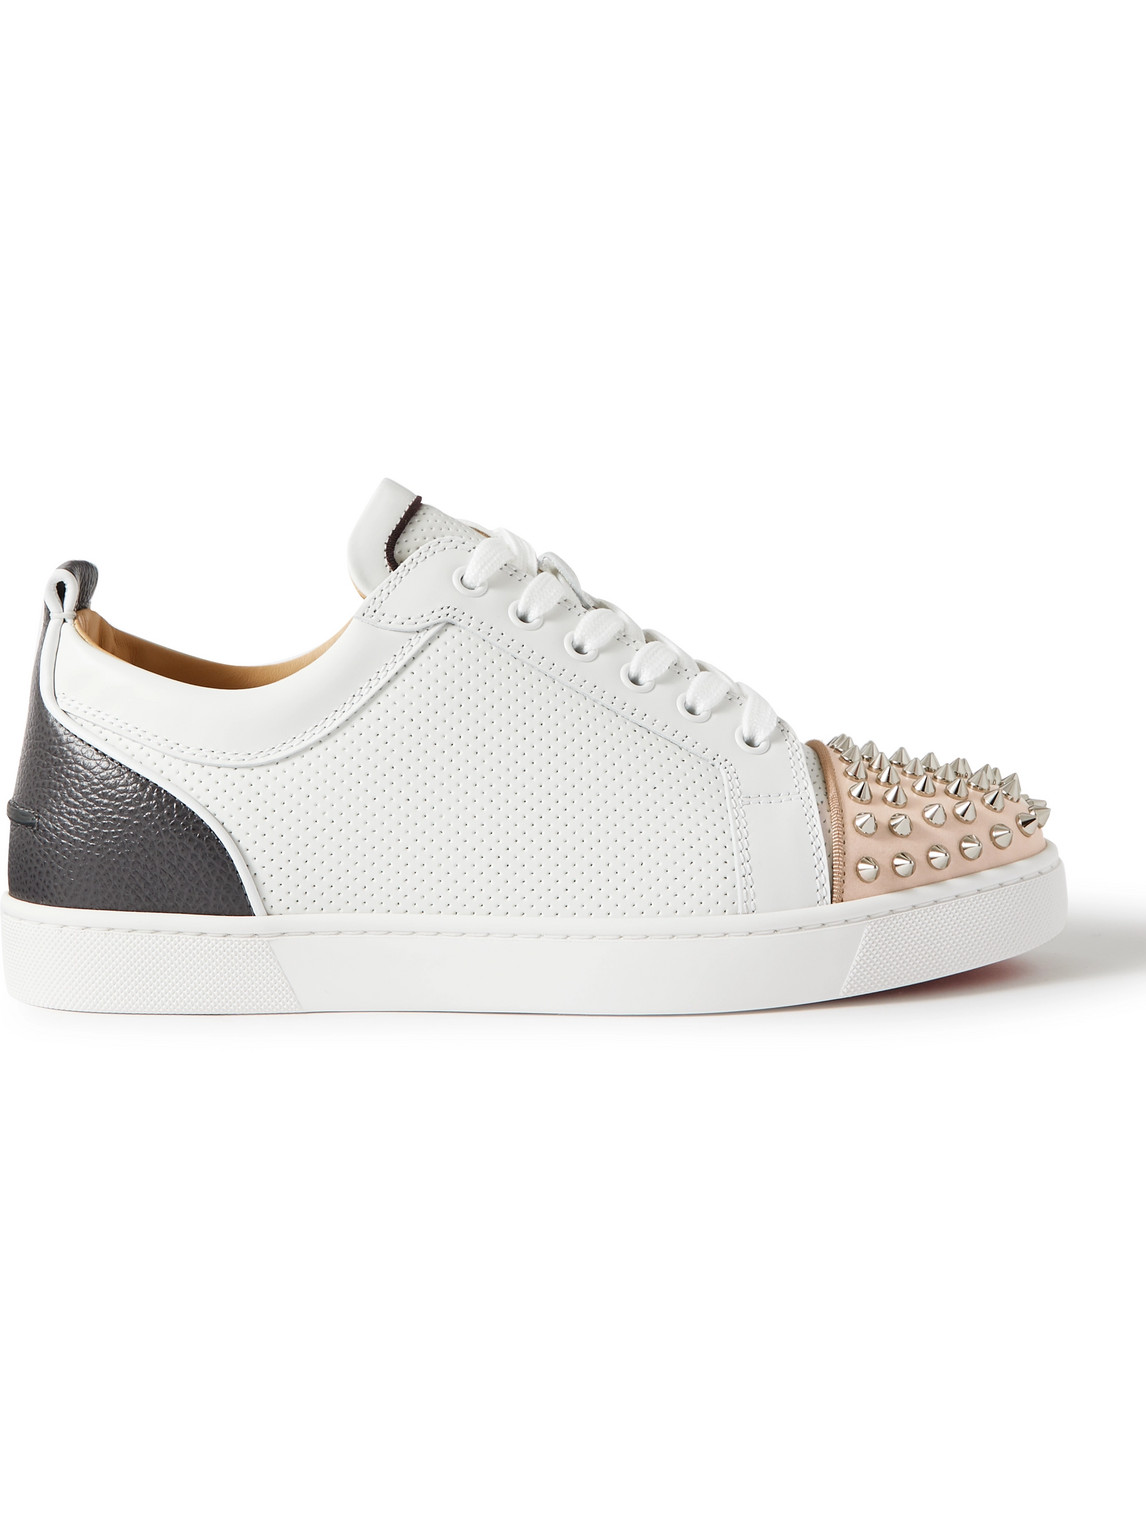 Christian Louboutin Louis Junior Spikes Cap-Toe Leather Sneakers White